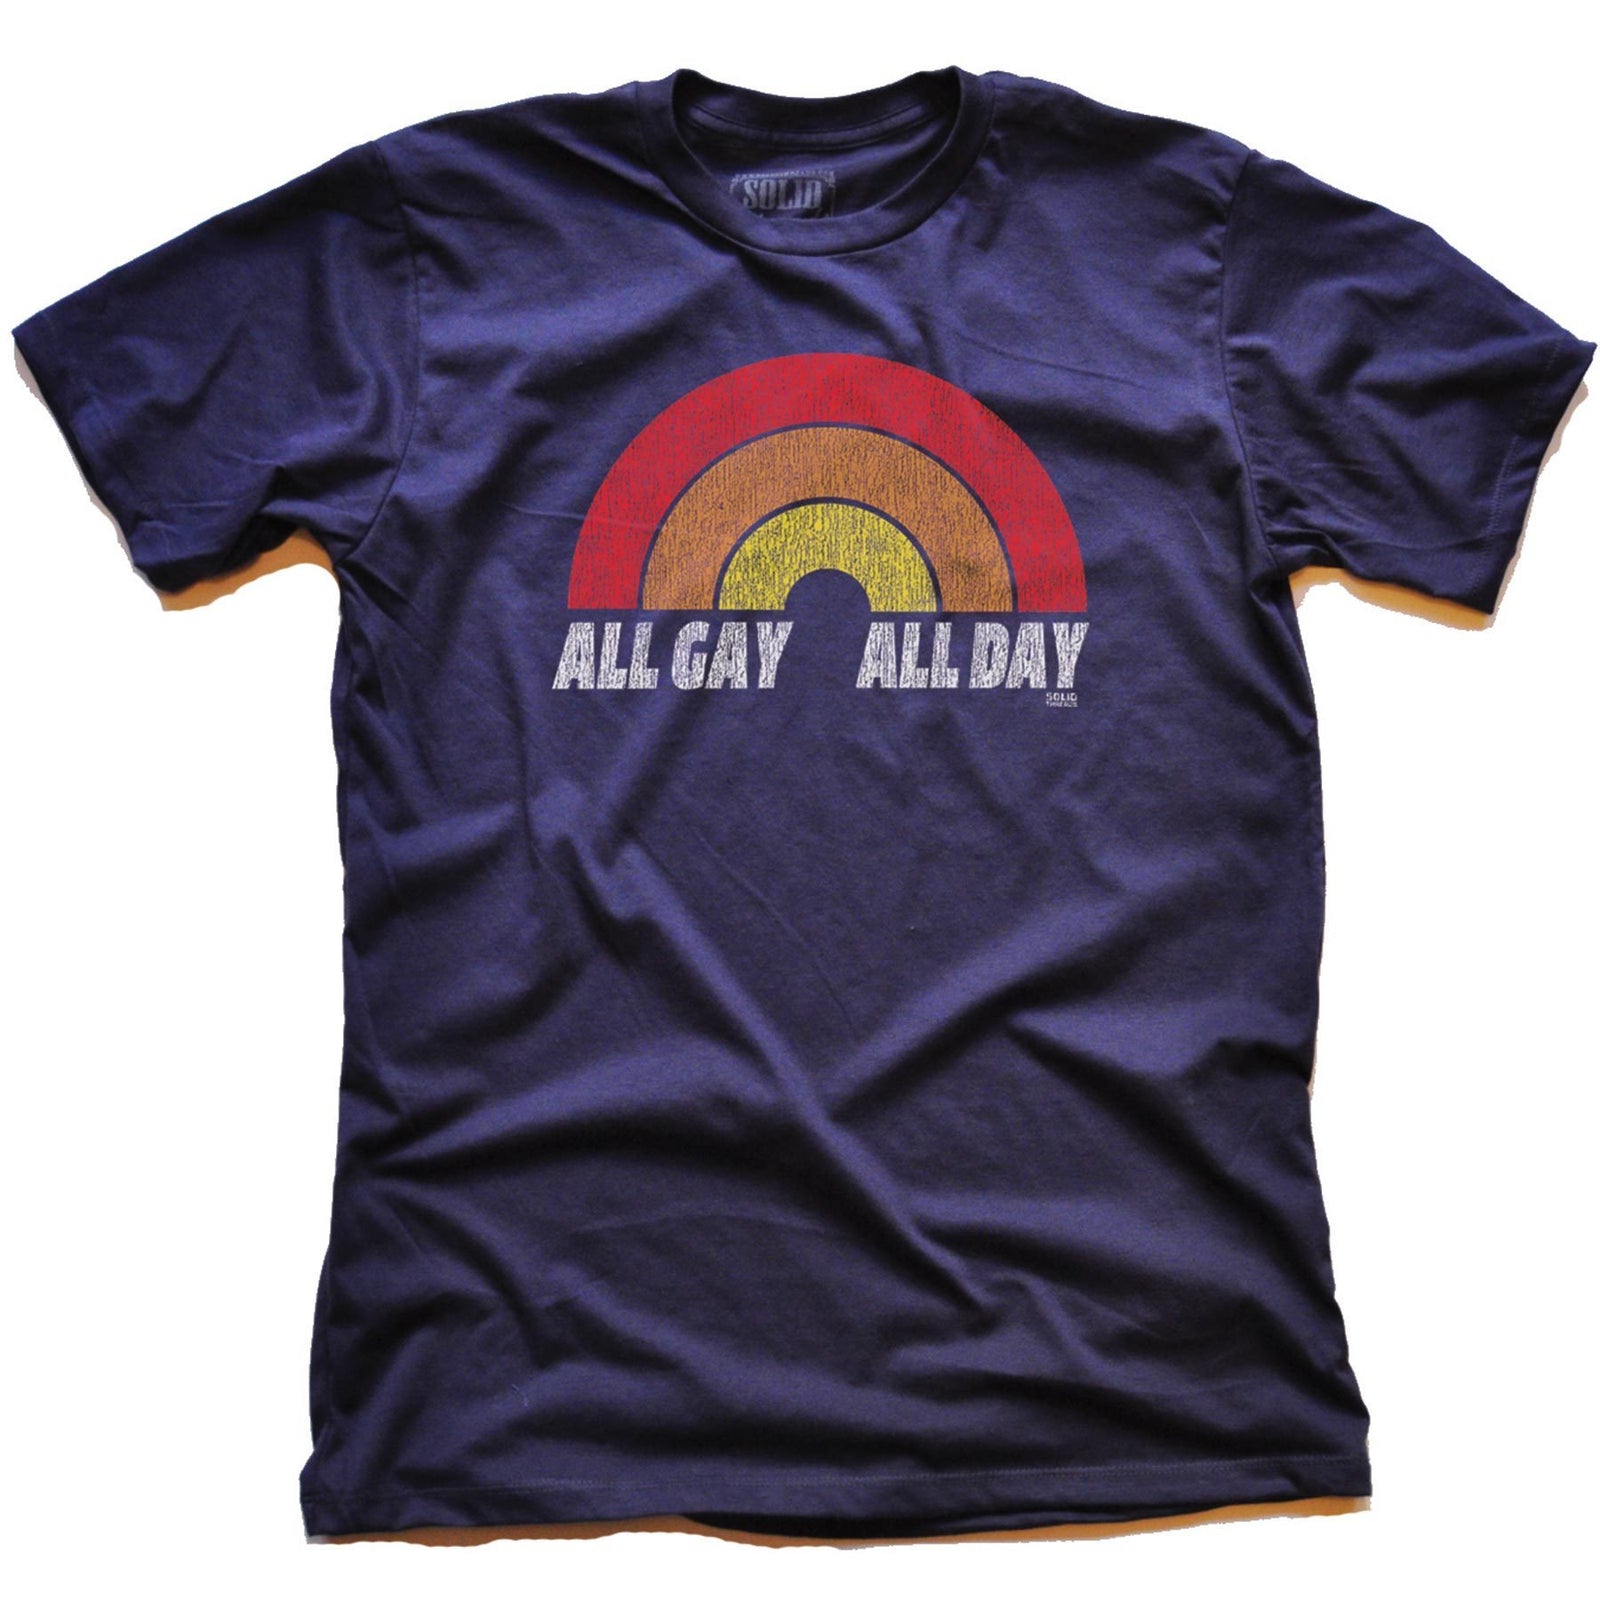 Men's All Gay All Day Vintage Graphic Tee | Retro LGBTQ Pride T-shirt | Solid Threads